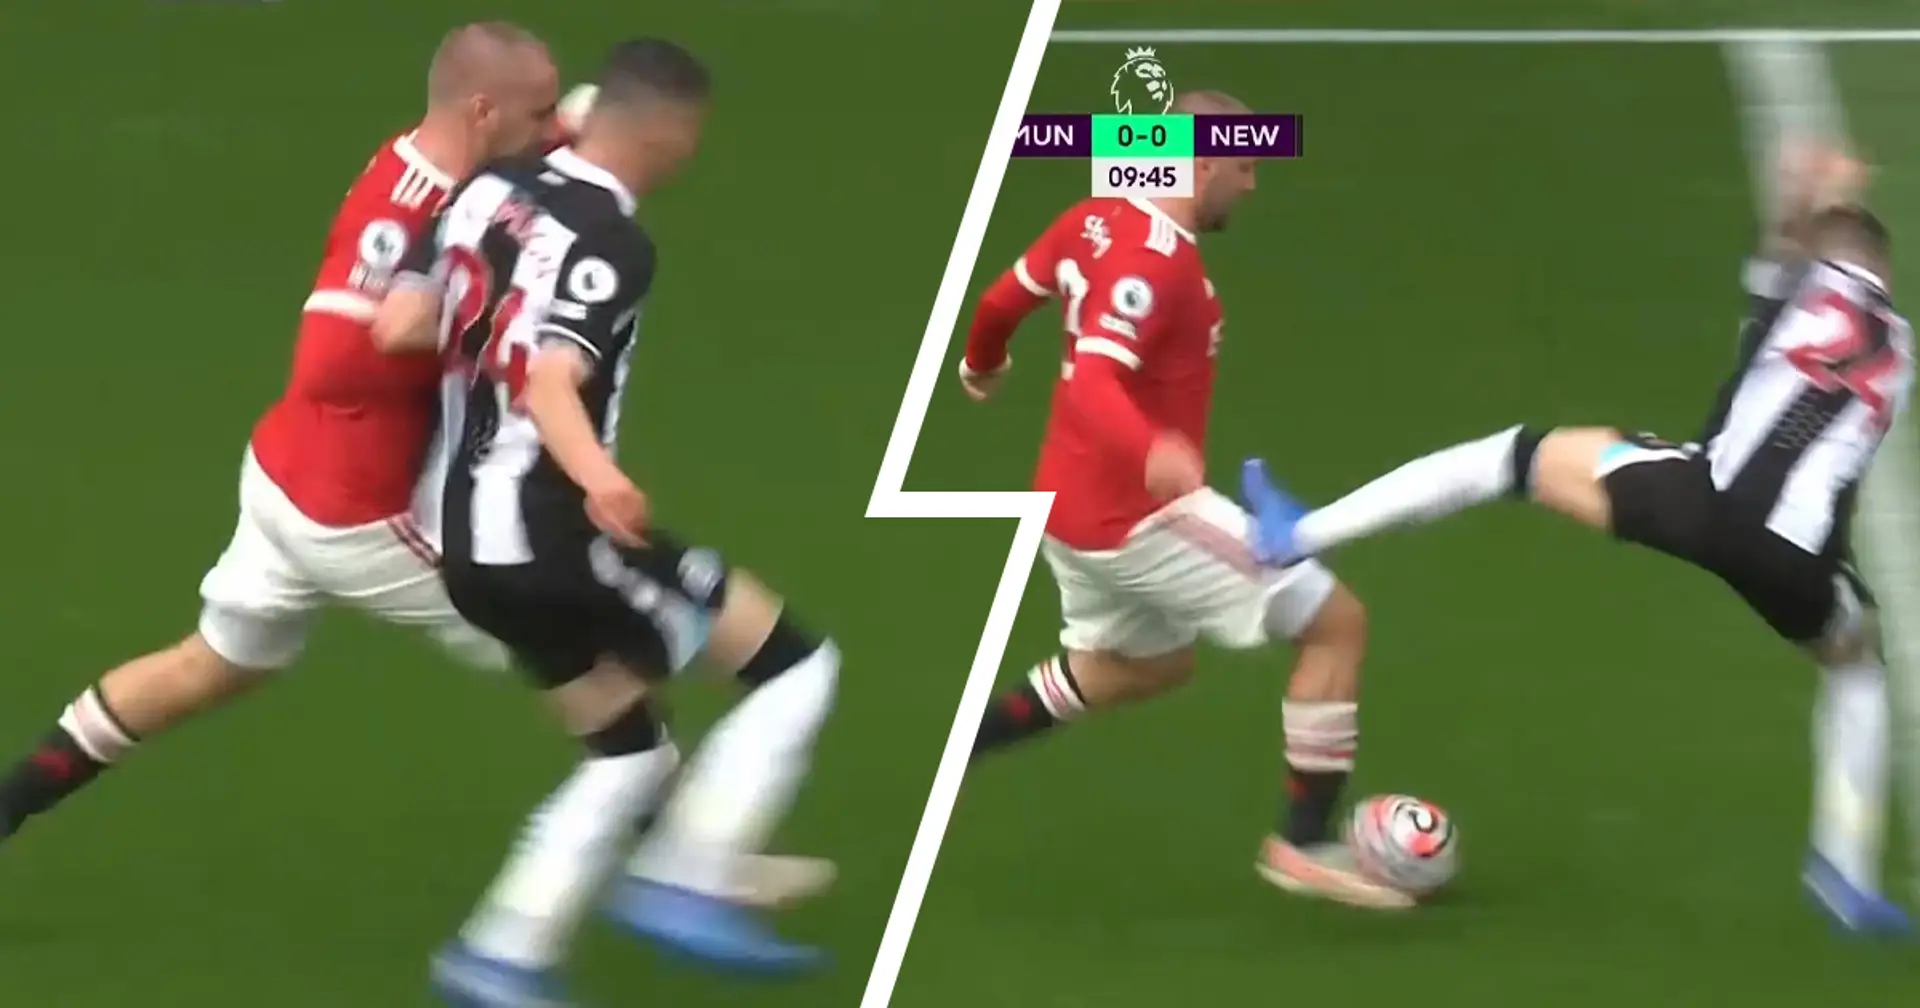 Luke Shaw sends Miguel Almiron flying with a simple shrug - spotted